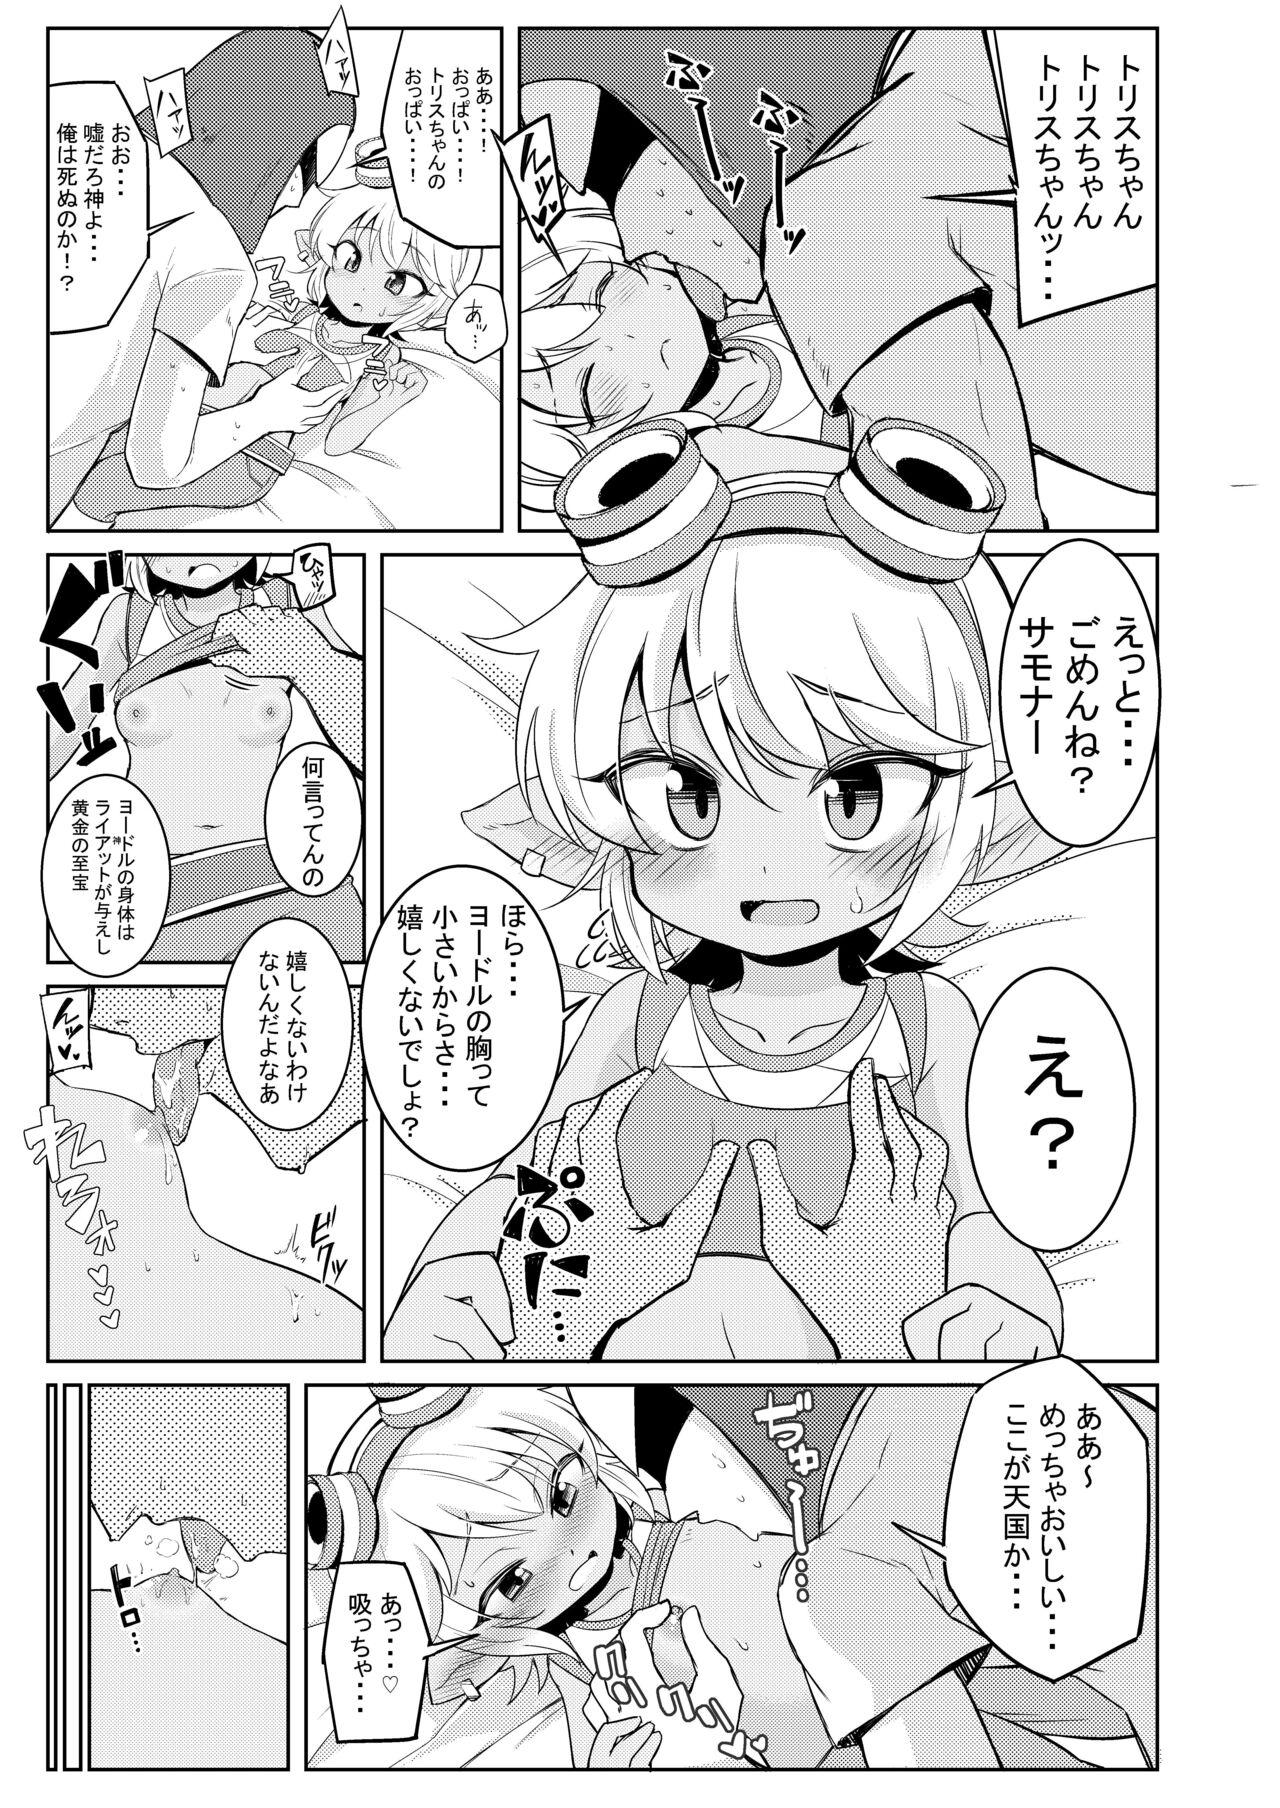 Letsdoeit Dosukebe Yodle focus on tristana! - League of legends Girl Get Fuck - Page 7